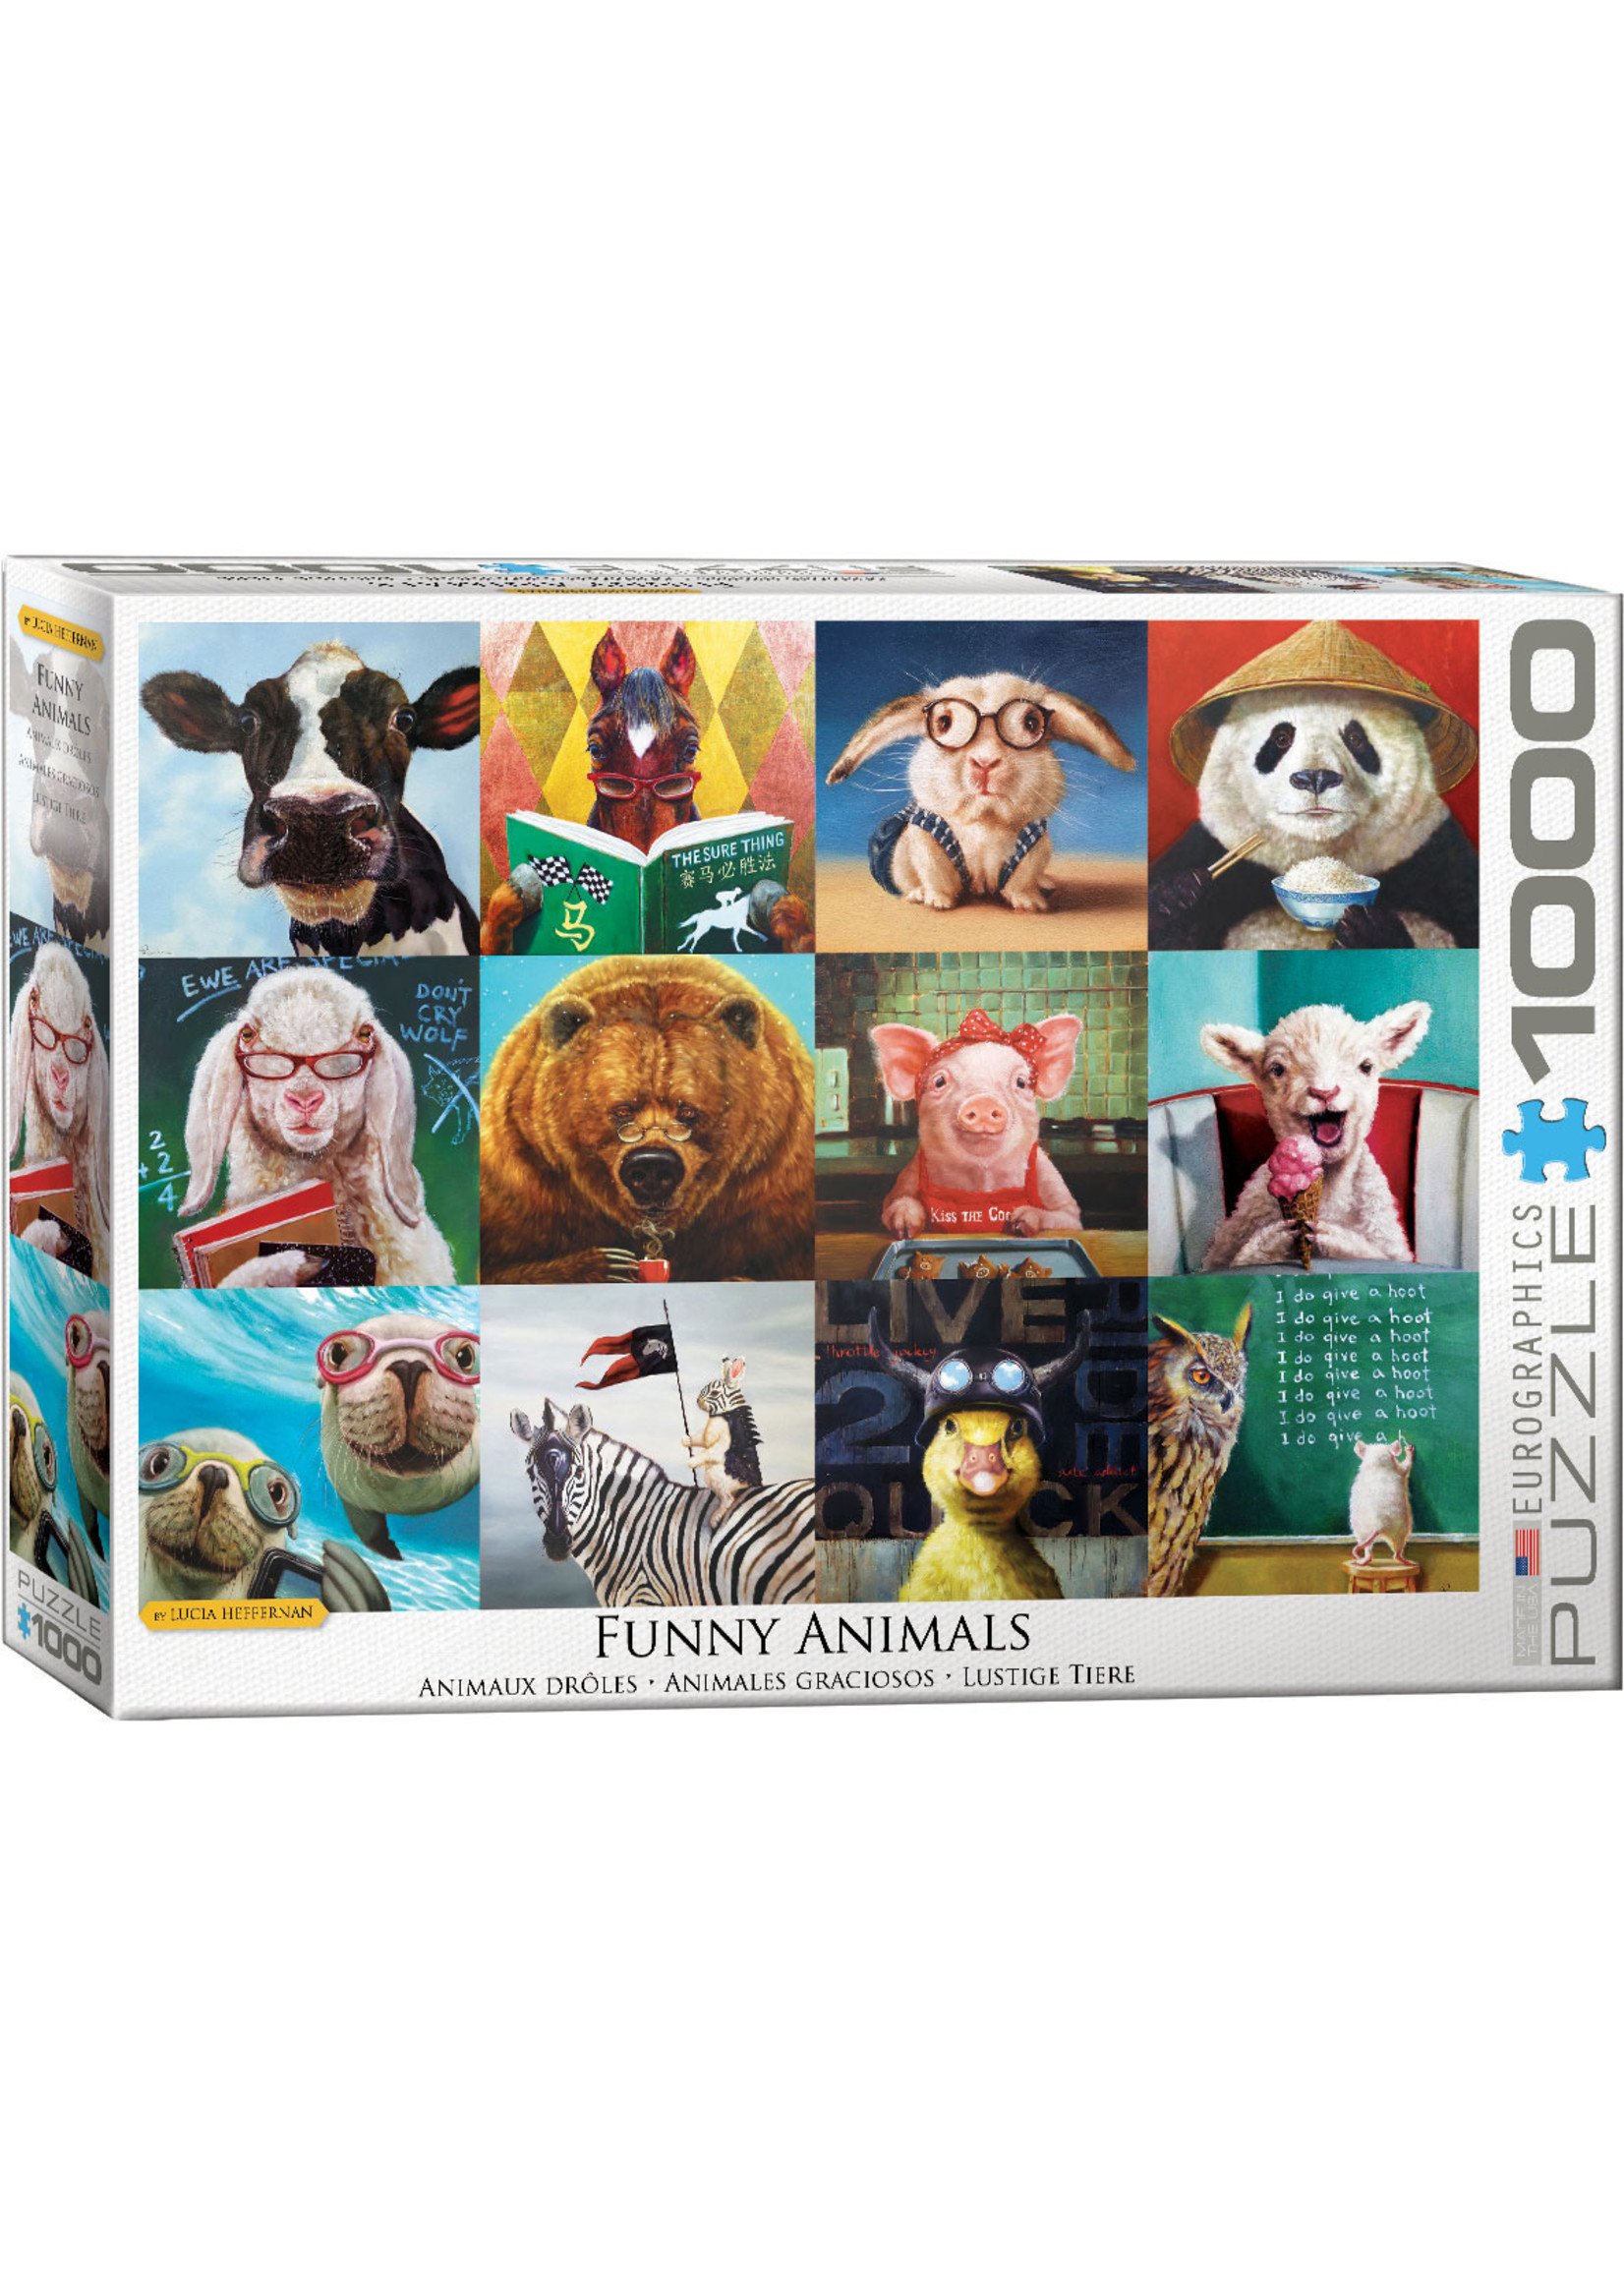 Details about   1000 Piece Jigsaw Puzzle Animals Landscapes Cities funny games D0Y6